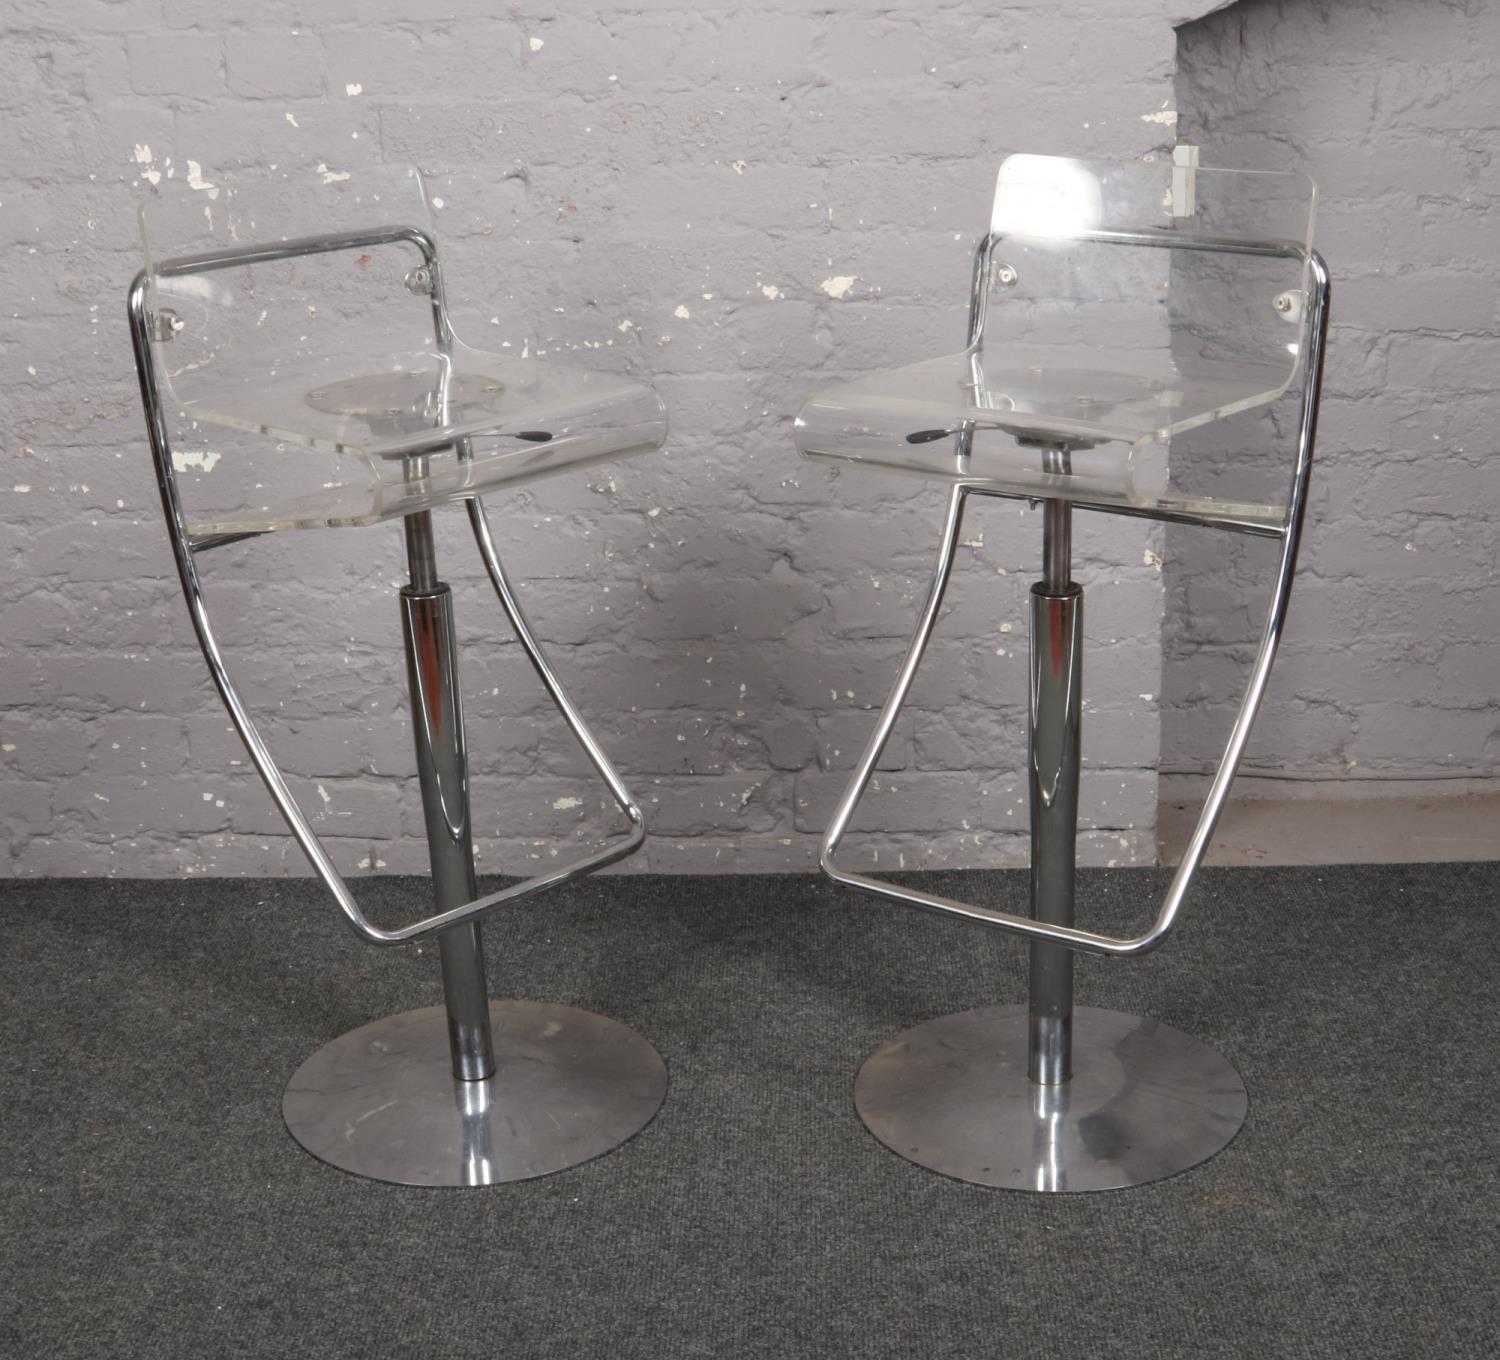 Two bar chairs, with chrome supports and clear perspex seats.